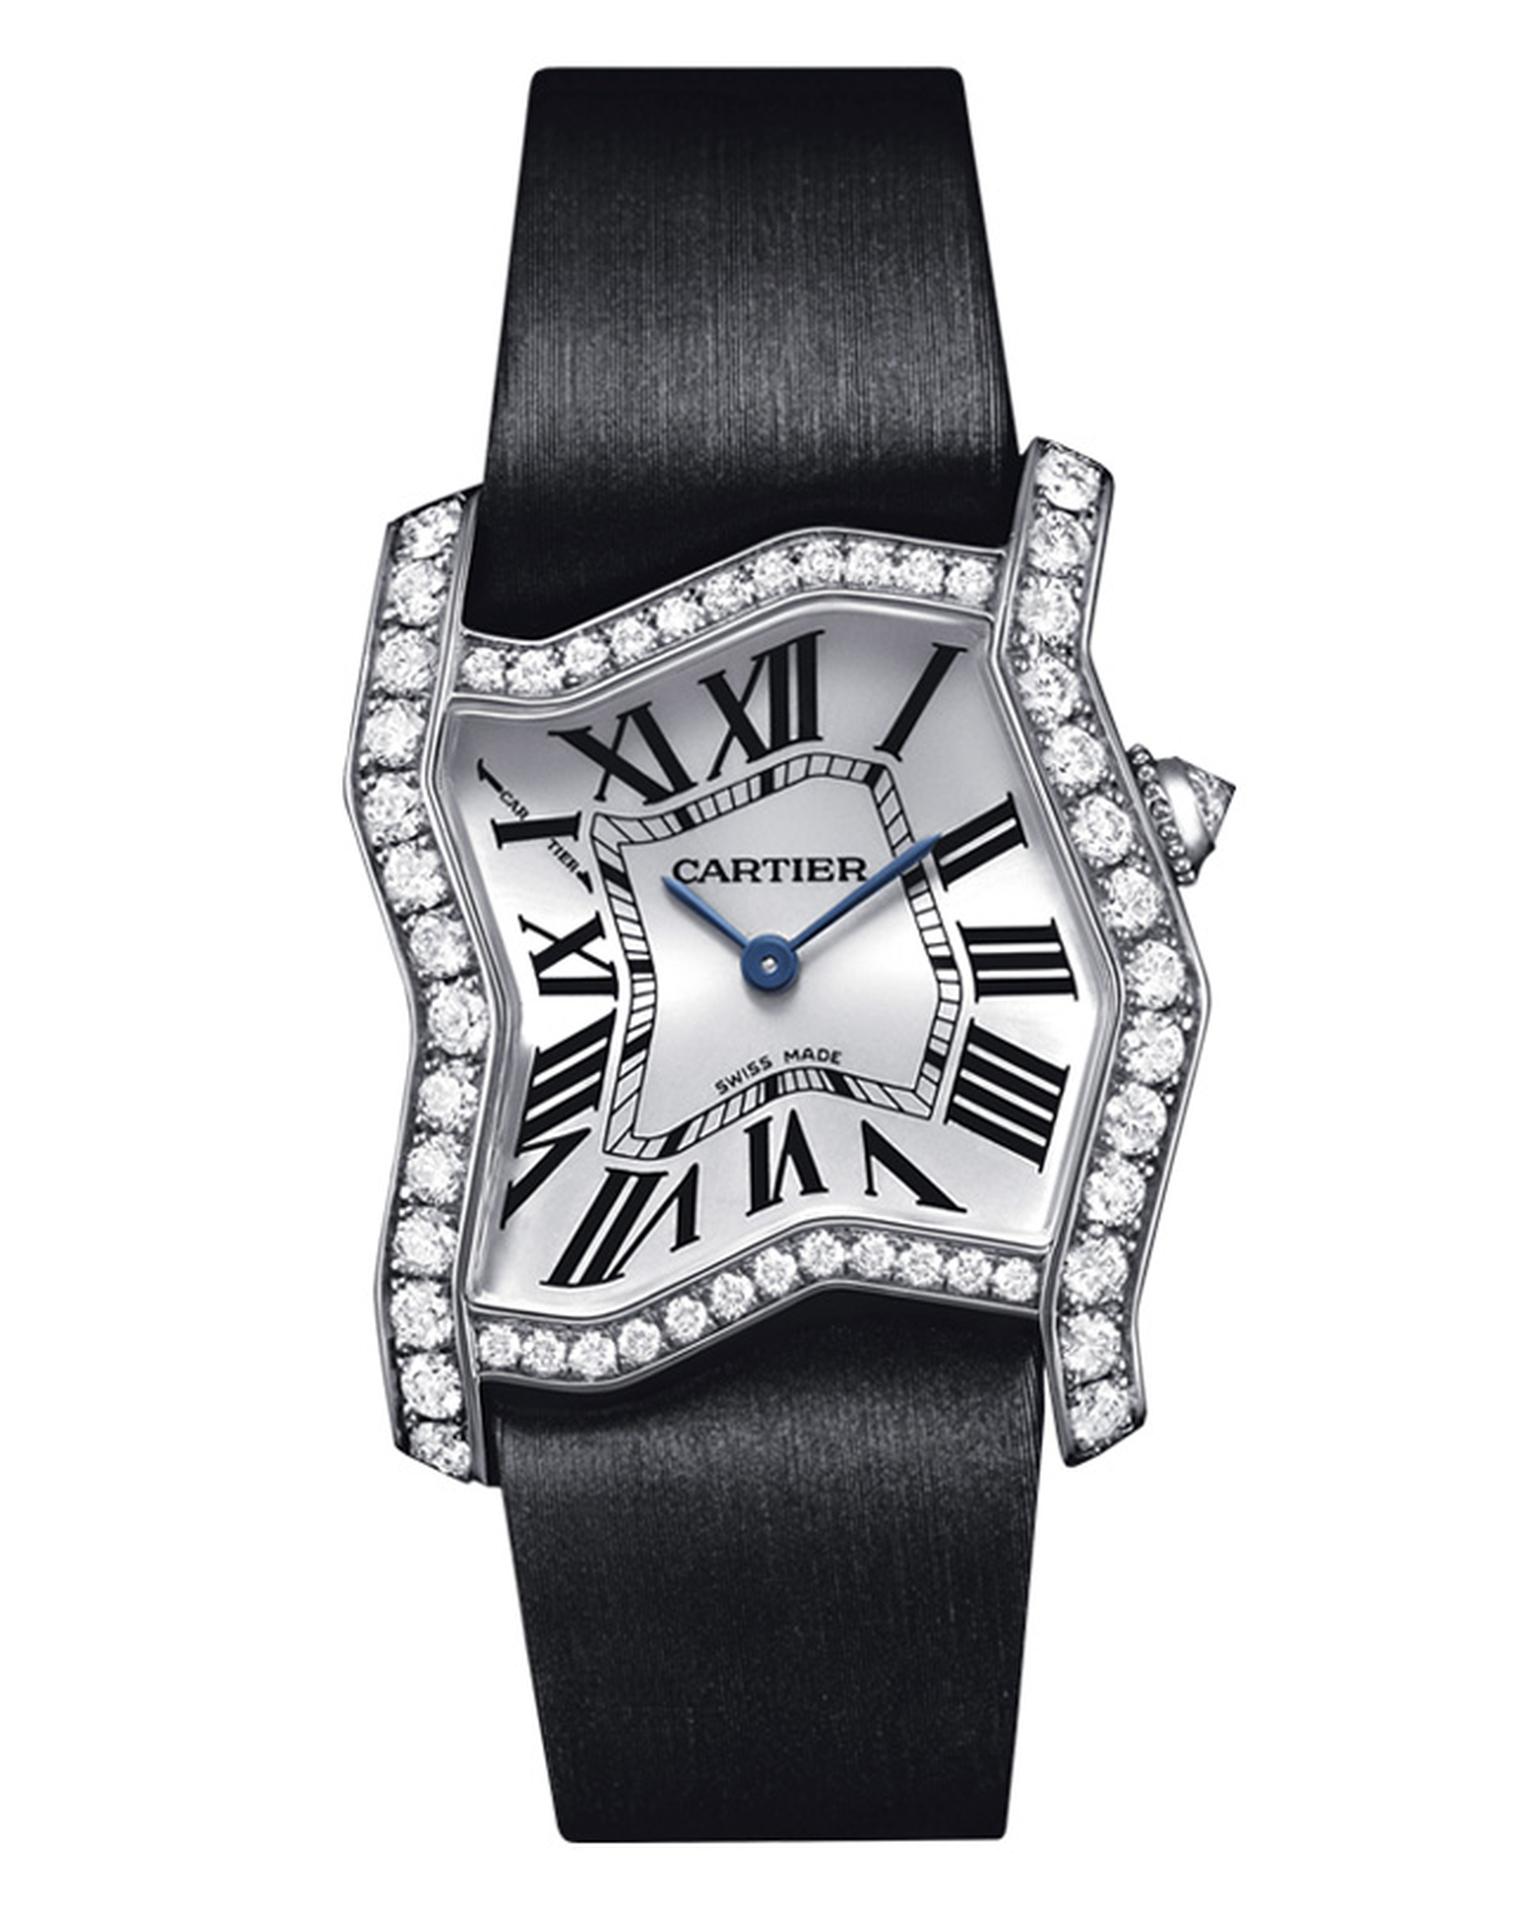 Cartier Tank Folle watch in white gold and diamonds_20130404_Main